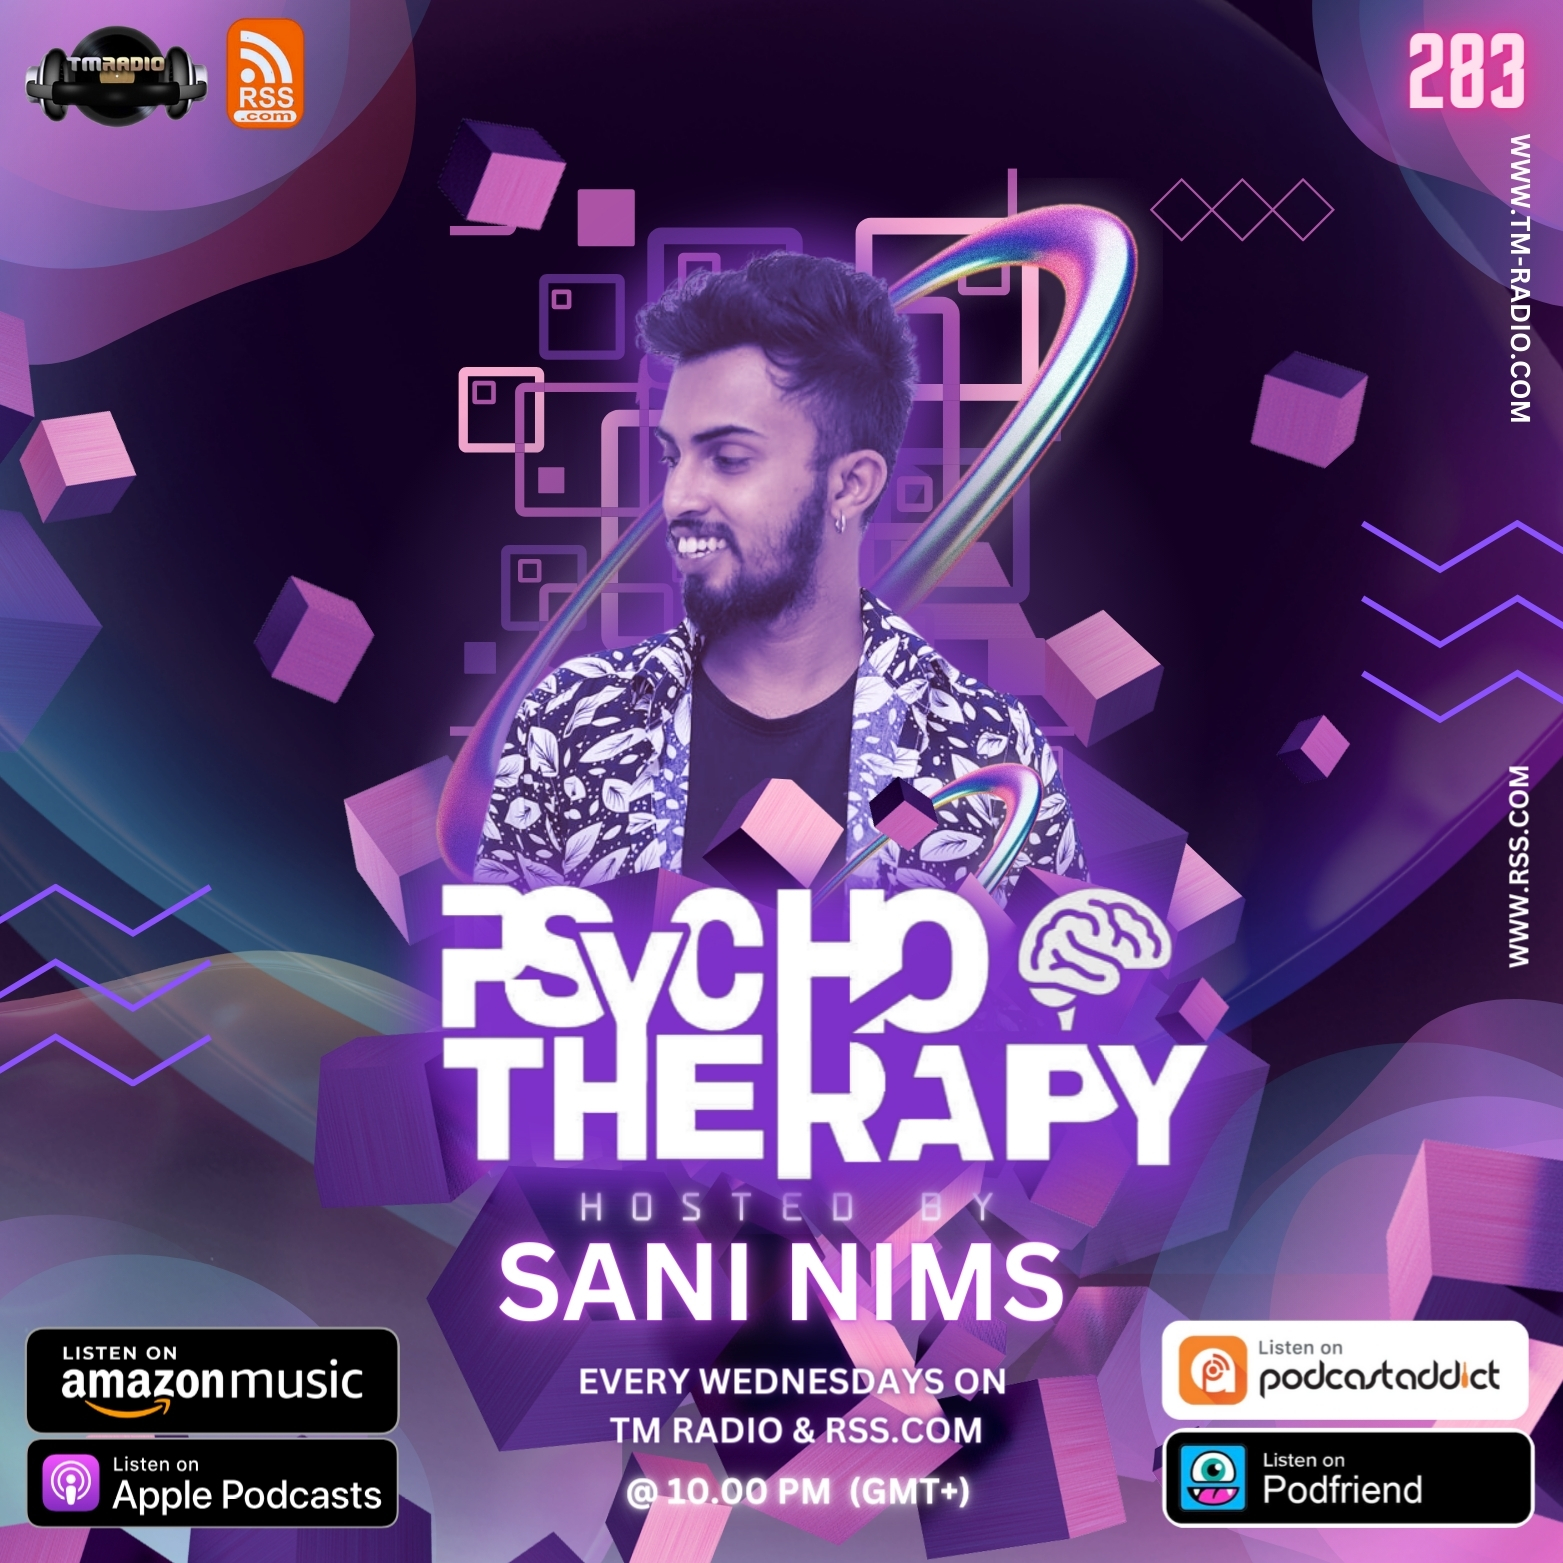 PSYCHO THERAPY EP 283 BY SANI NIMS ON TM RADIO (from March 6th)